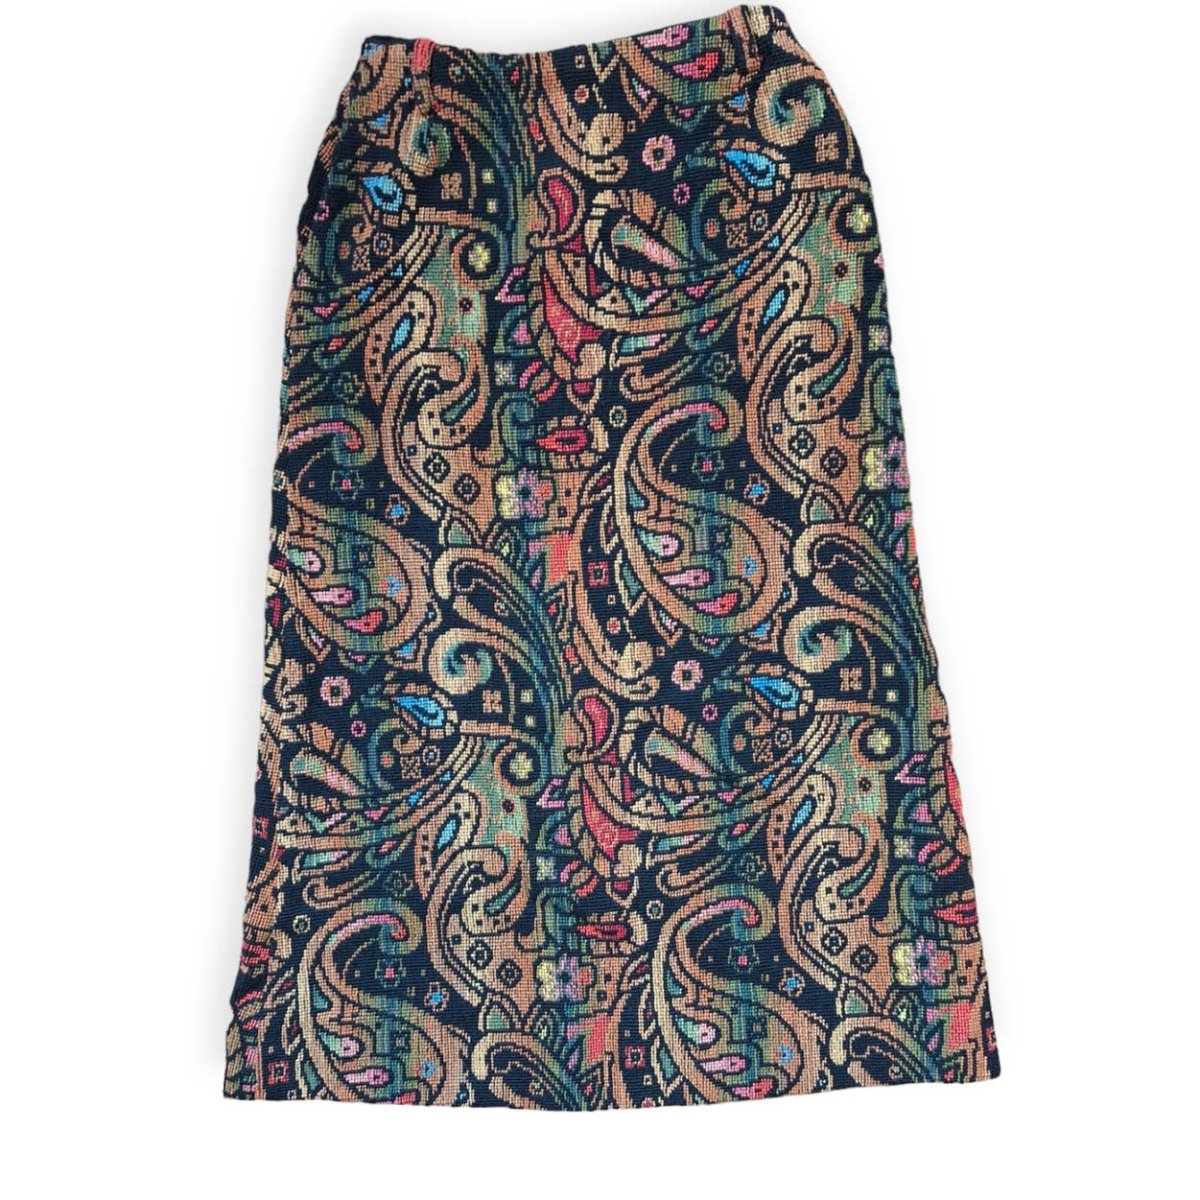 Vintage 60s/70s Psychedelic Paisley Tapestry maxi Skirt Medium Waist 30" - themallvintage The Mall Vintage